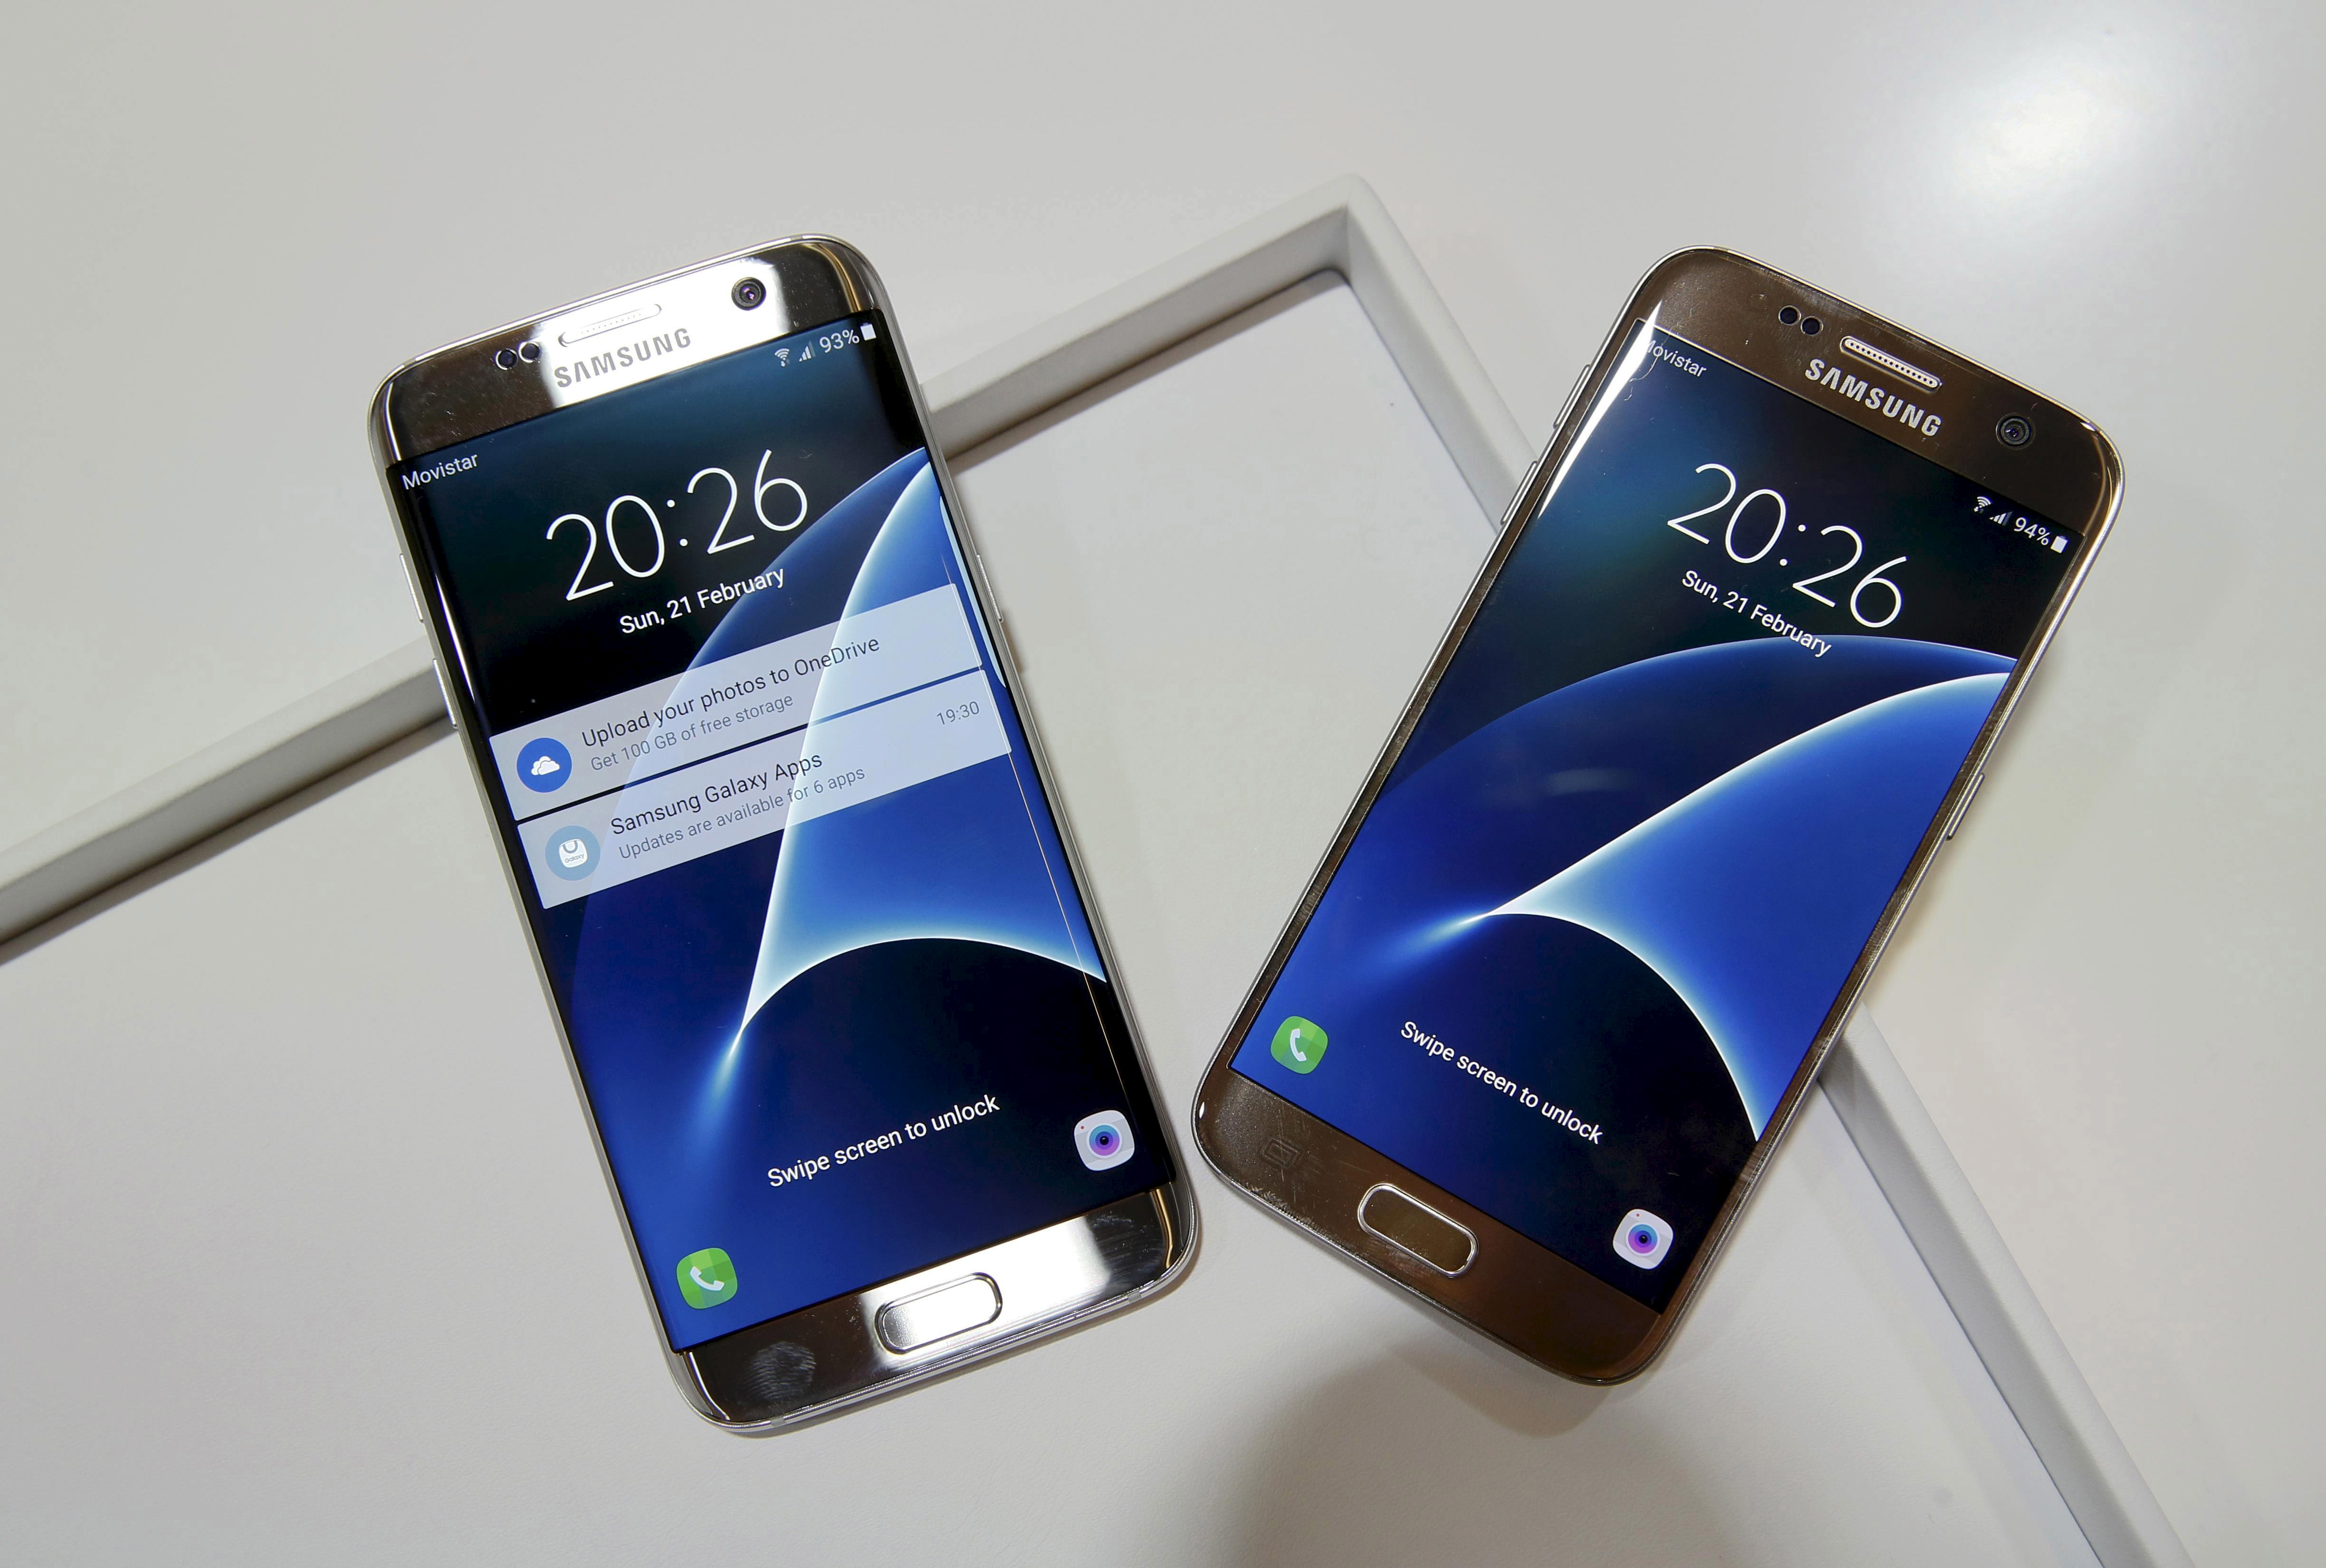 Ejercer Dinkarville terminado Samsung Galaxy S7 and Galaxy S7 Edge review roundup: Should you upgrade? -  CBS News